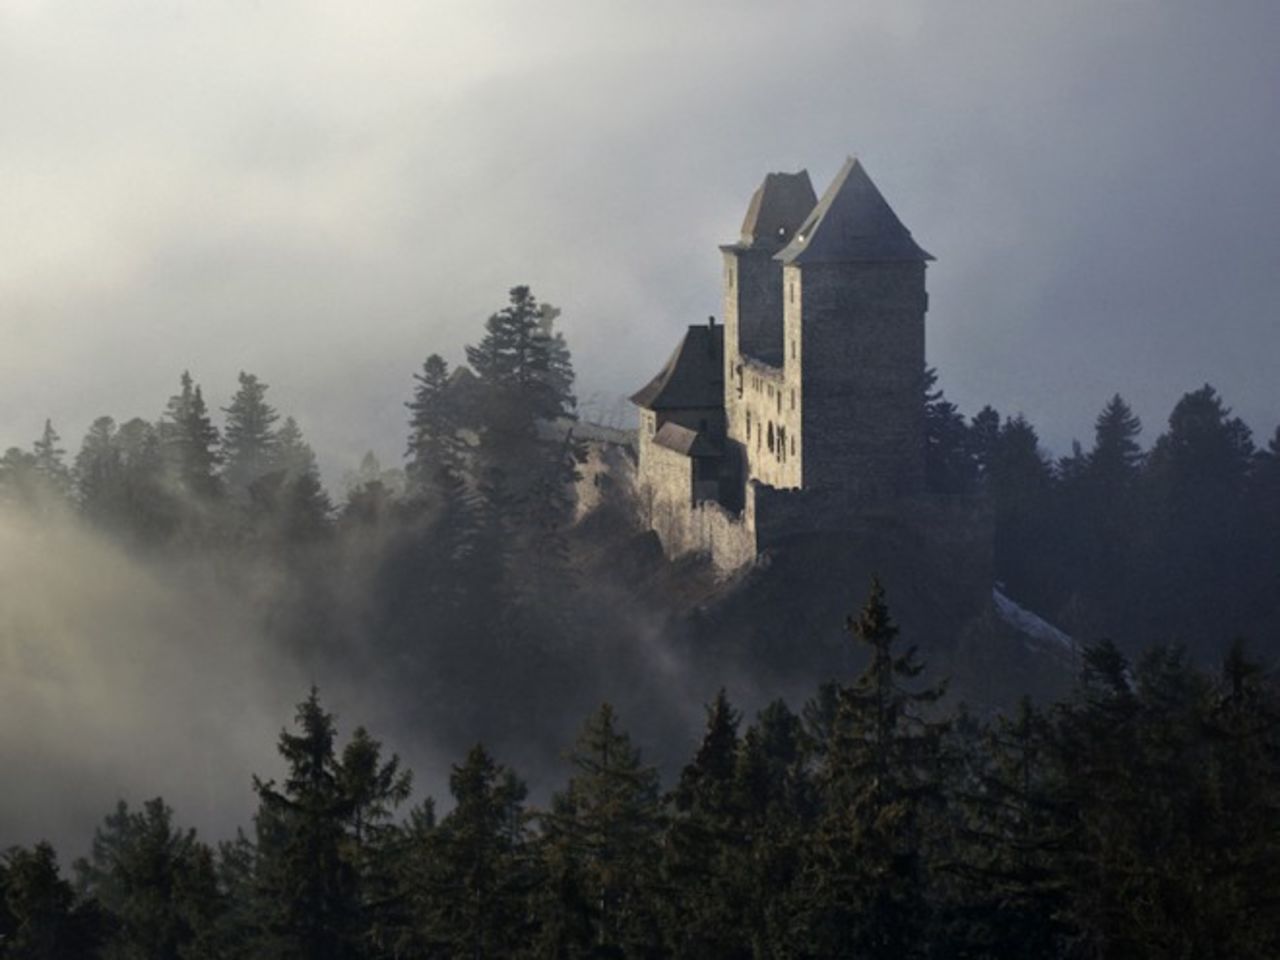 Castle Kasperk, Czech Republic. A previously unpublished photo in the series.